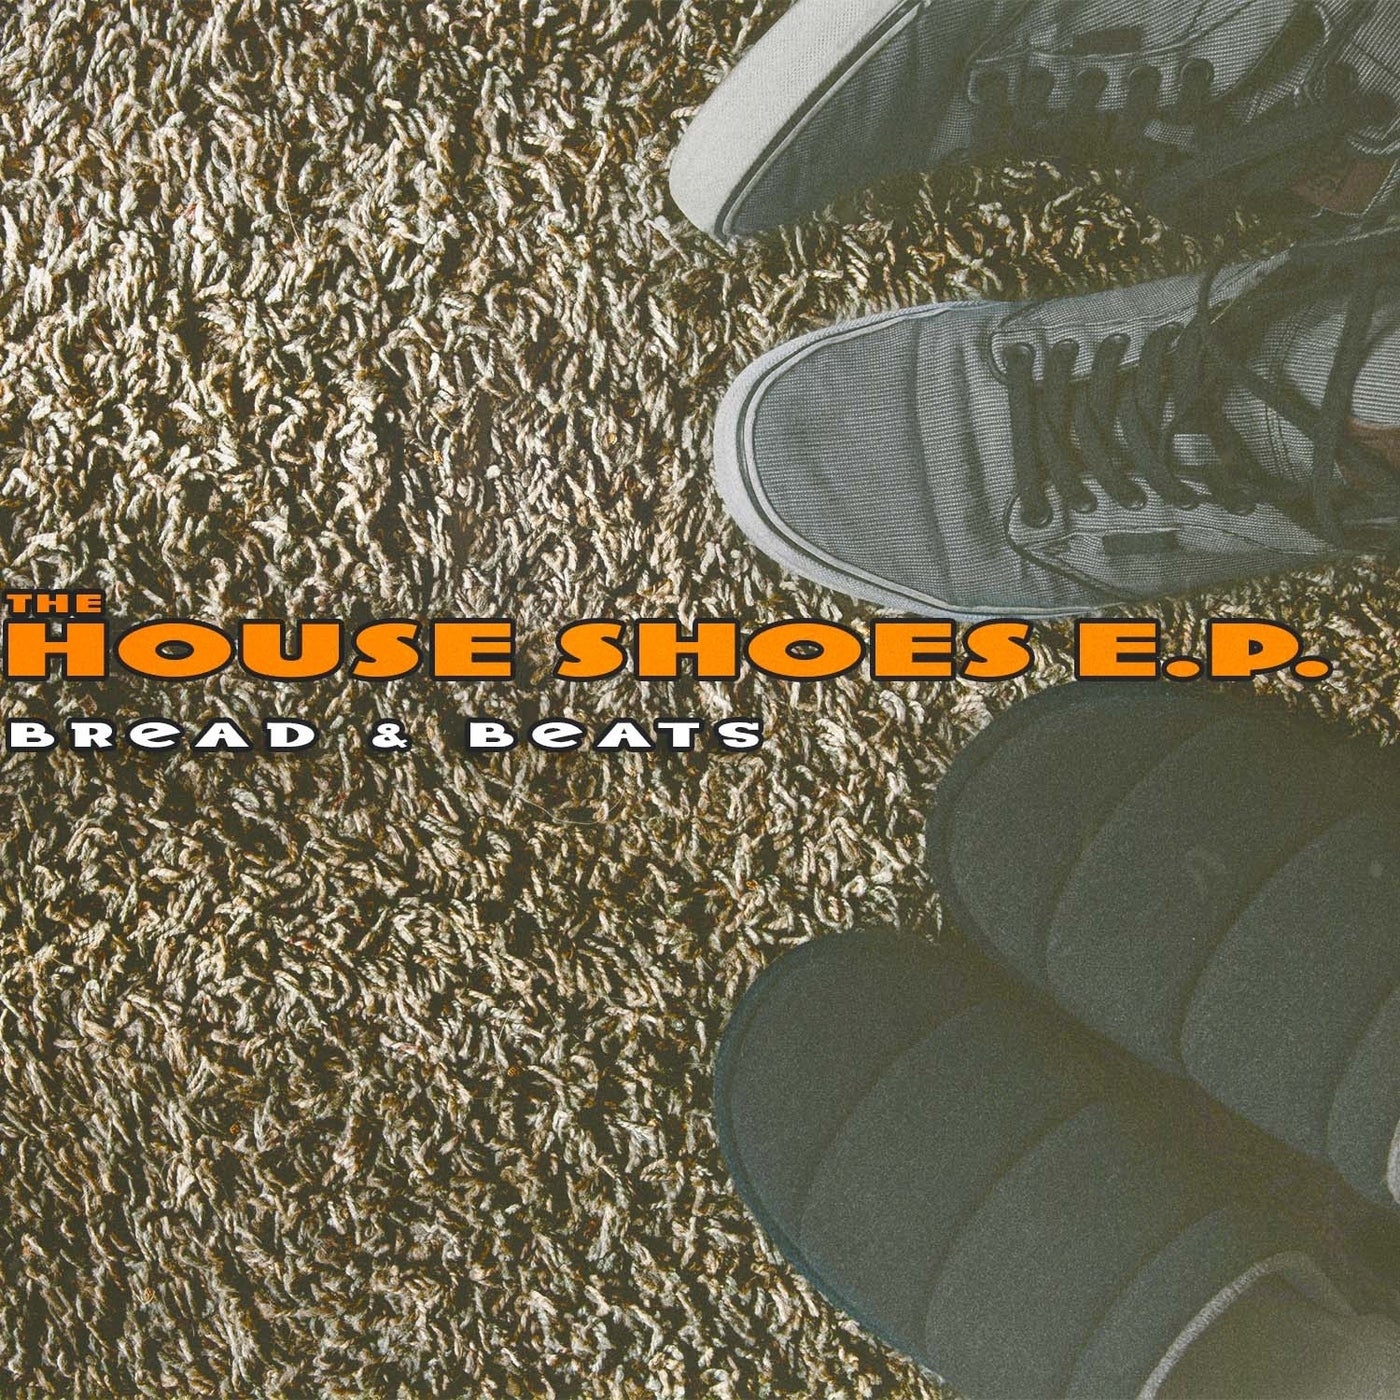 The House Shoes